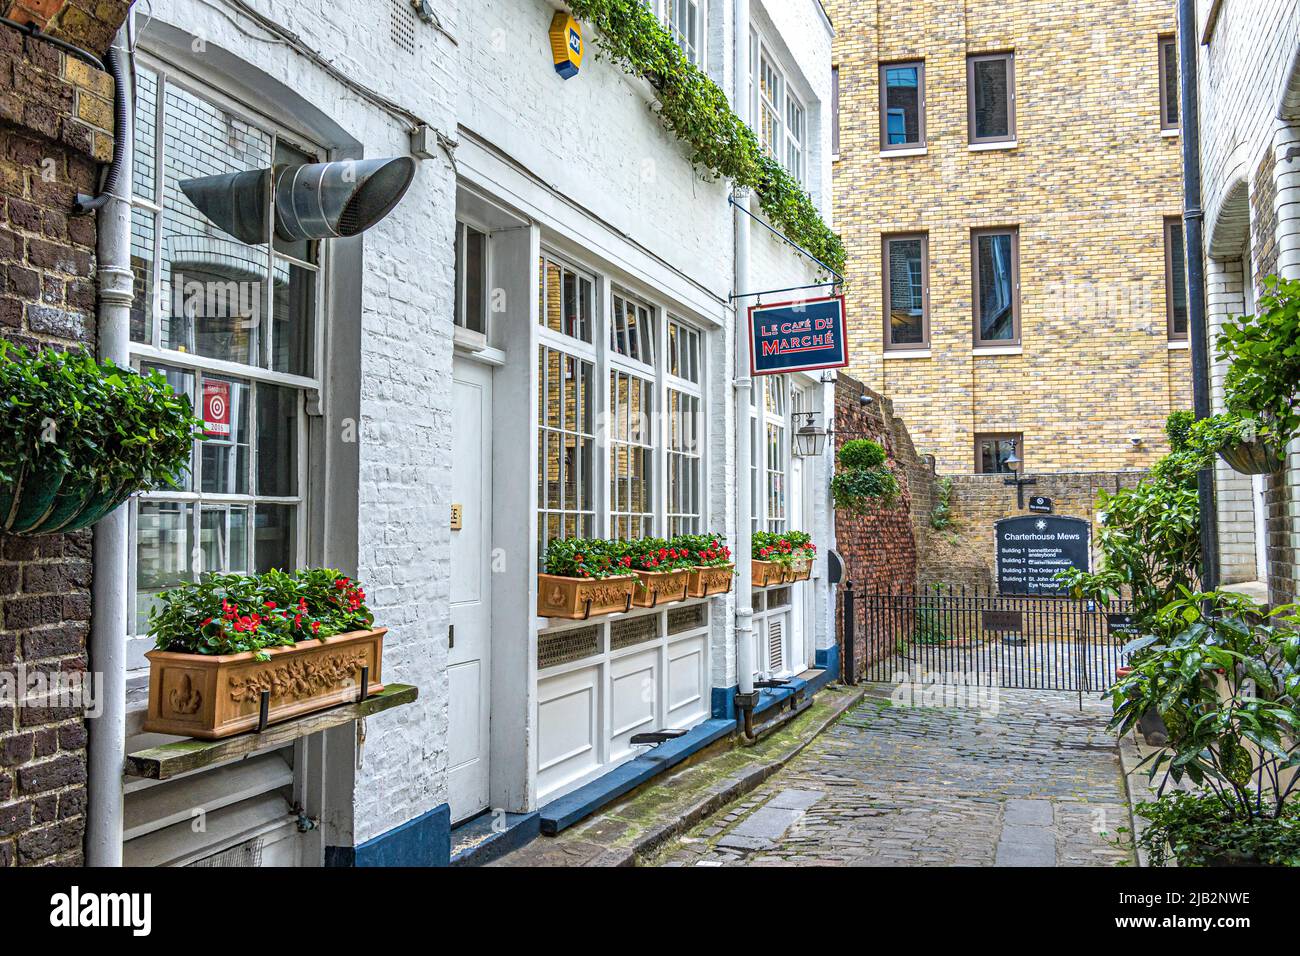 Le Cafe du Marche ,a French restaurant tucked away down a cobbled mews on the corner of historic Charterhouse Square , London EC1 Stock Photo